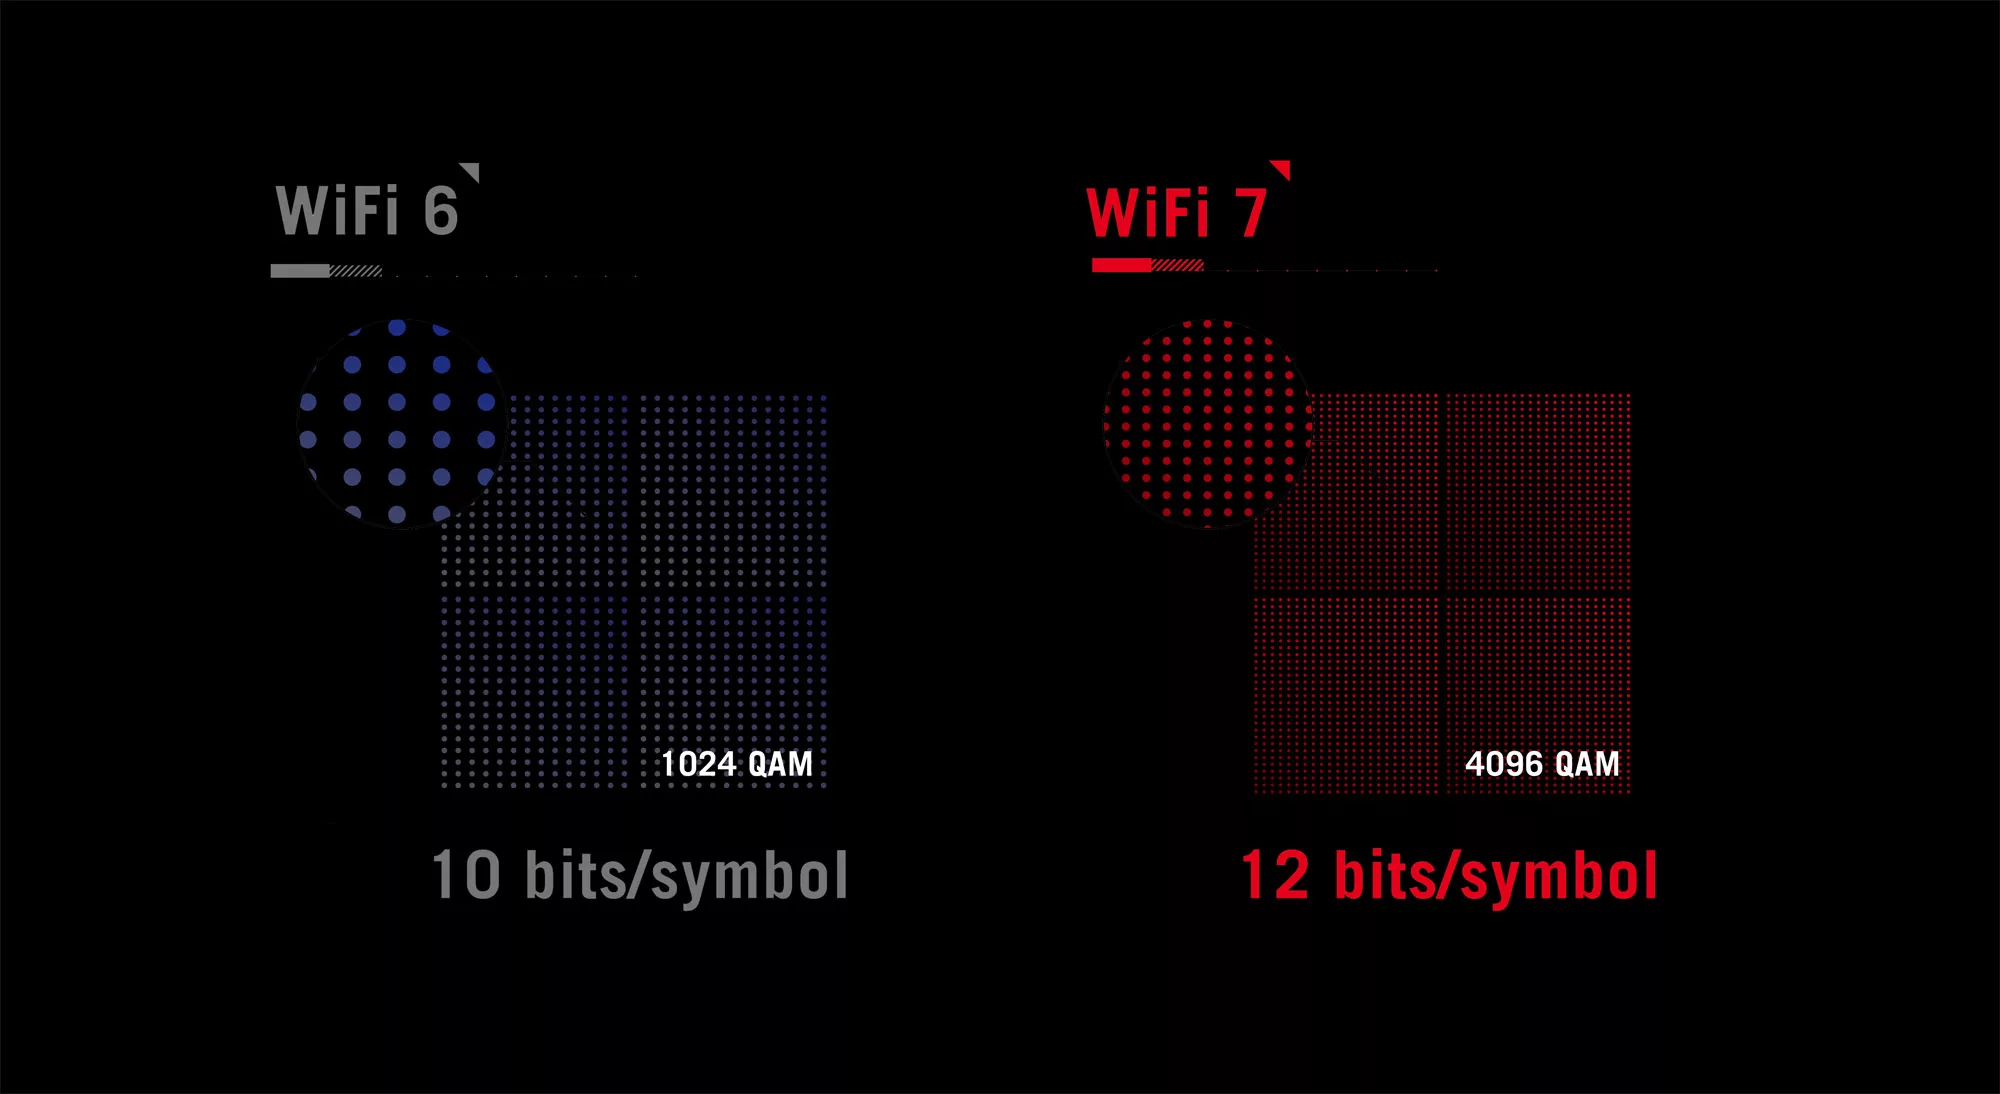 Infographic showing that 4096 QAM offers 12 bits/symbol over the 10 bits/symbol possible with WiFi 6.